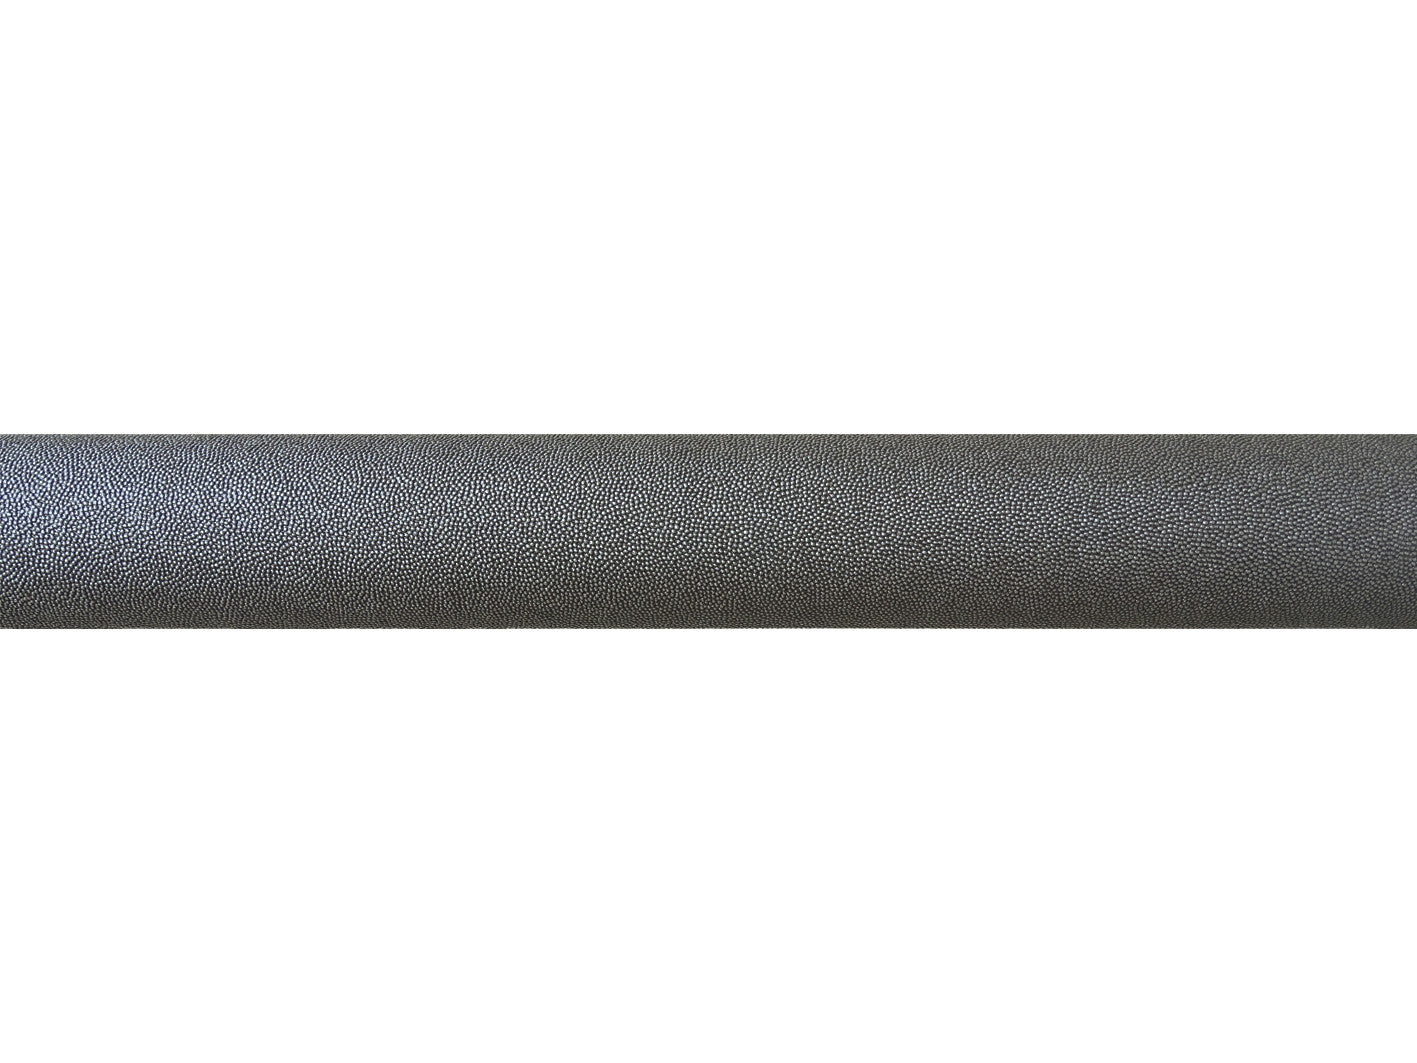 shagreen textured black pepper tracked curtain pole bronze track by Walcot House